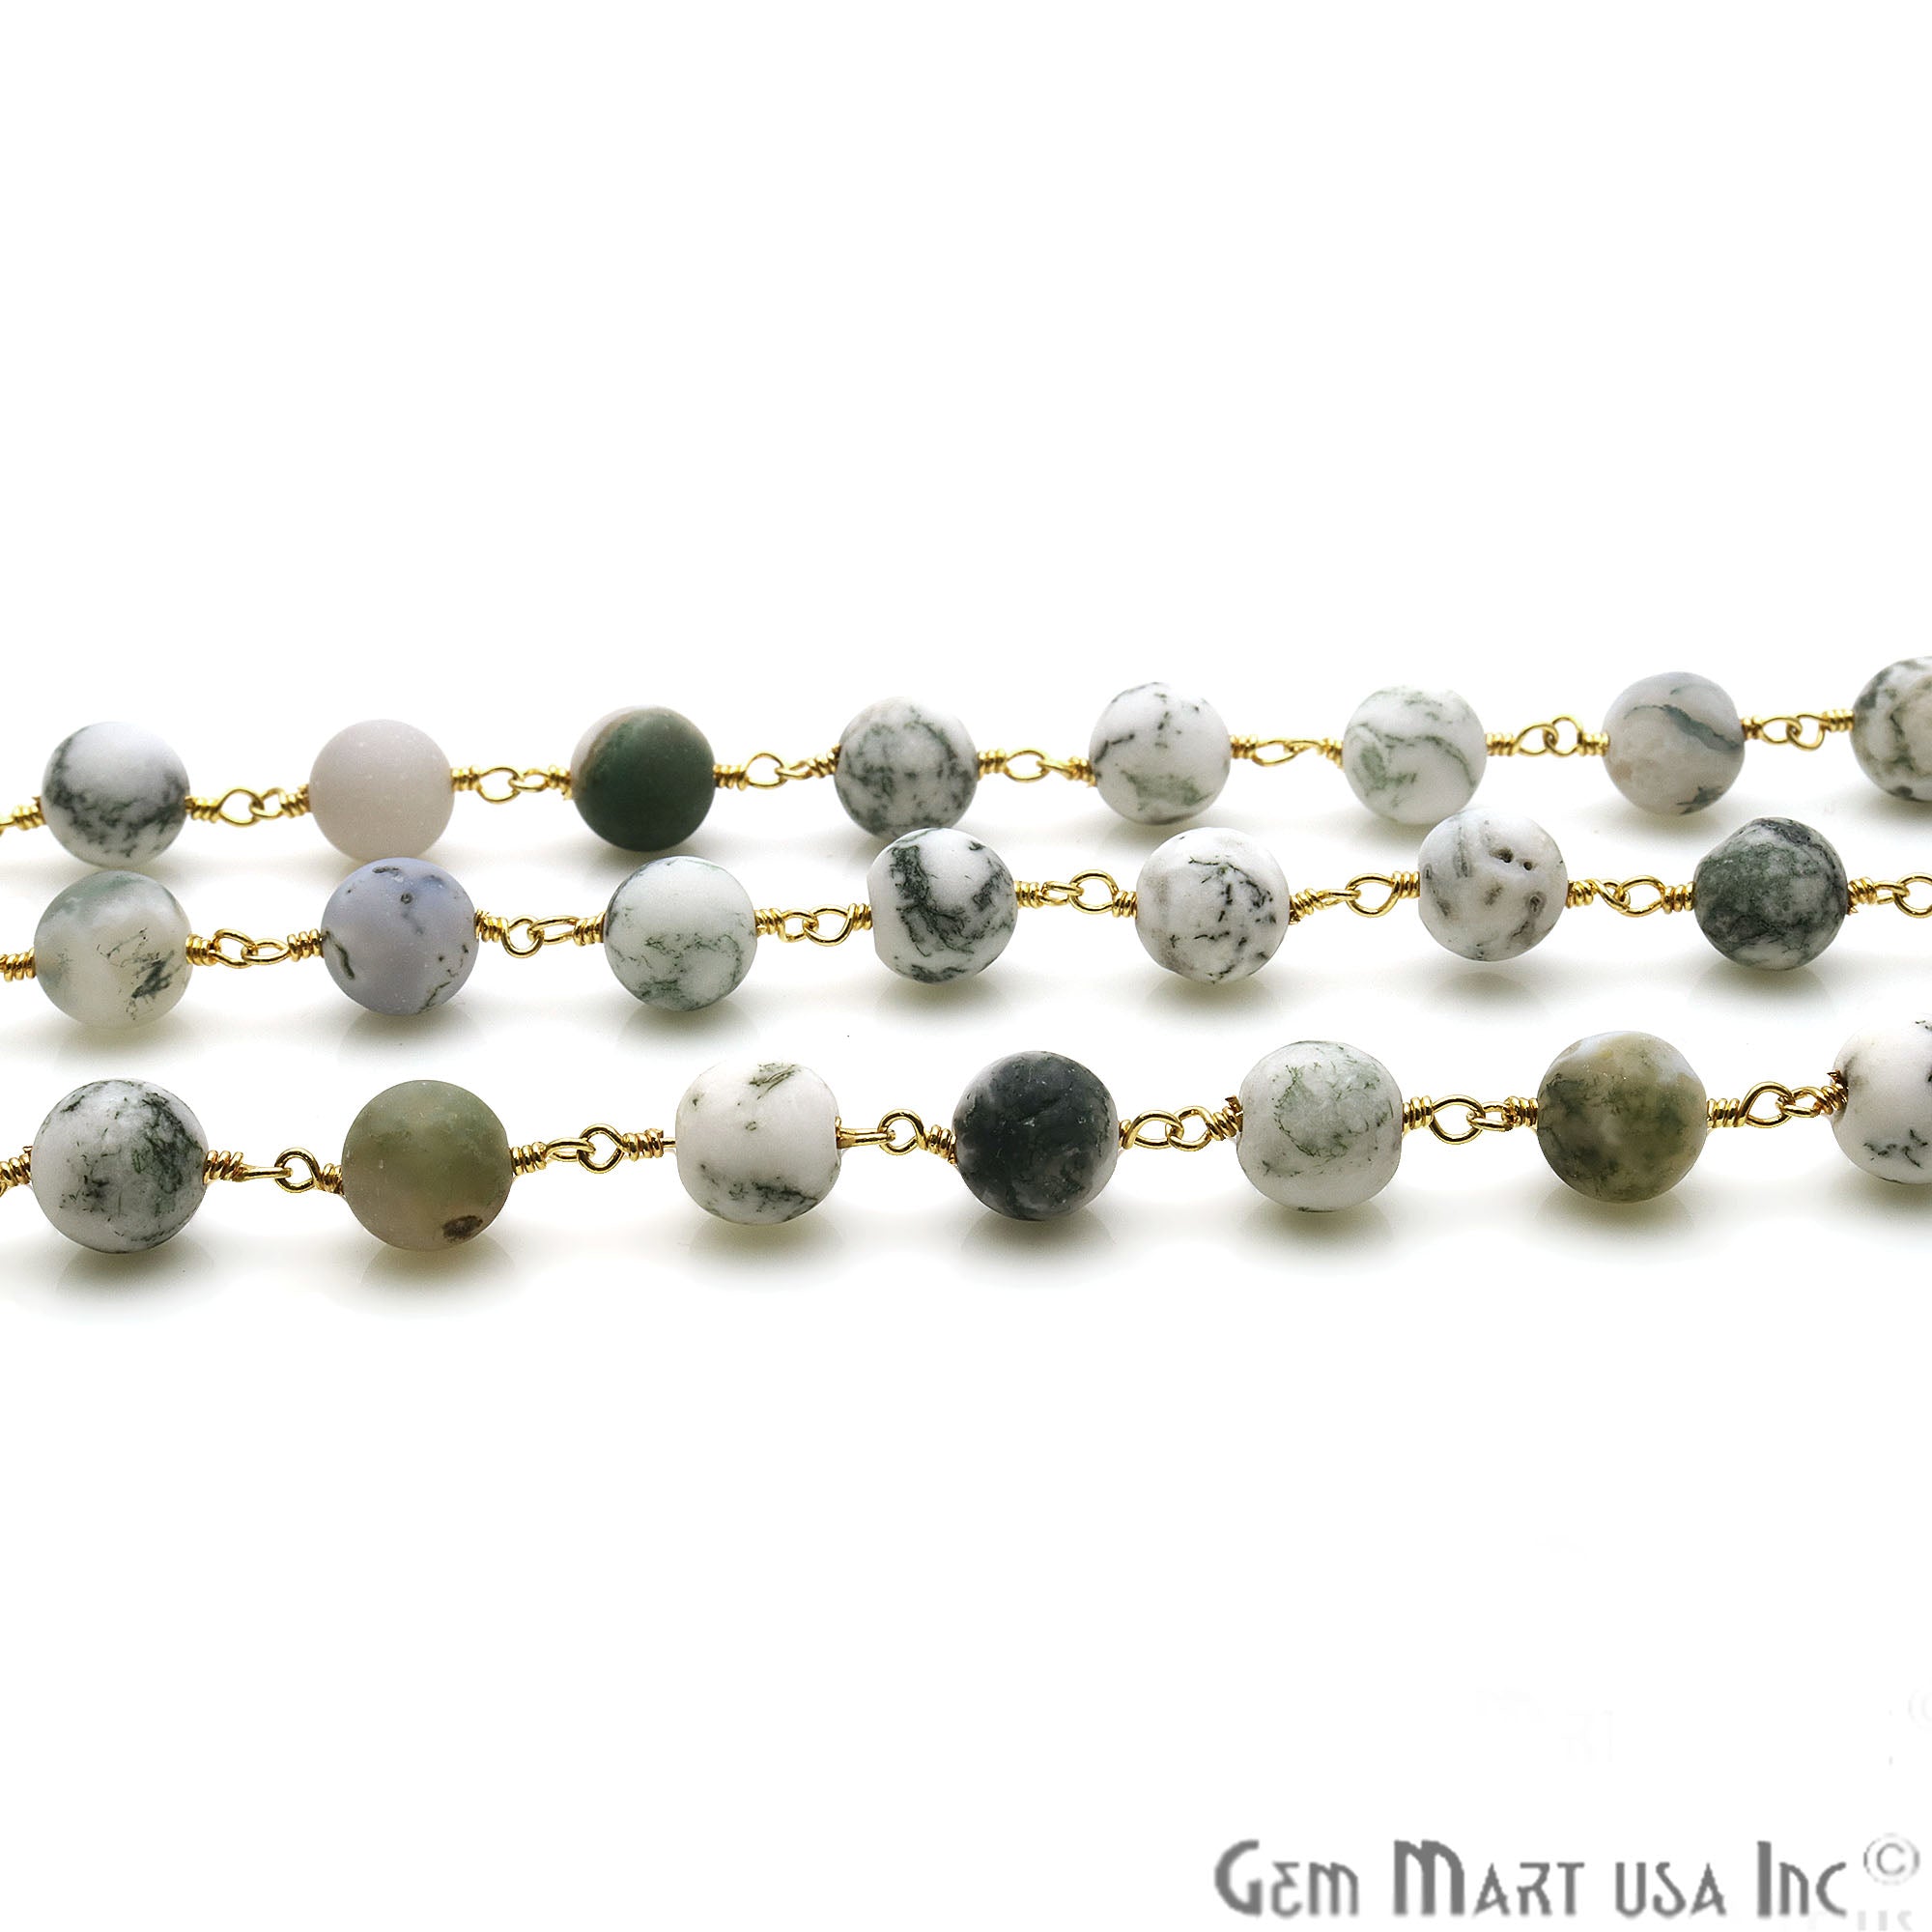 Green Agate Frosted Beads 8mm Gold Plated Wire Wrapped Rosary Chain - GemMartUSA